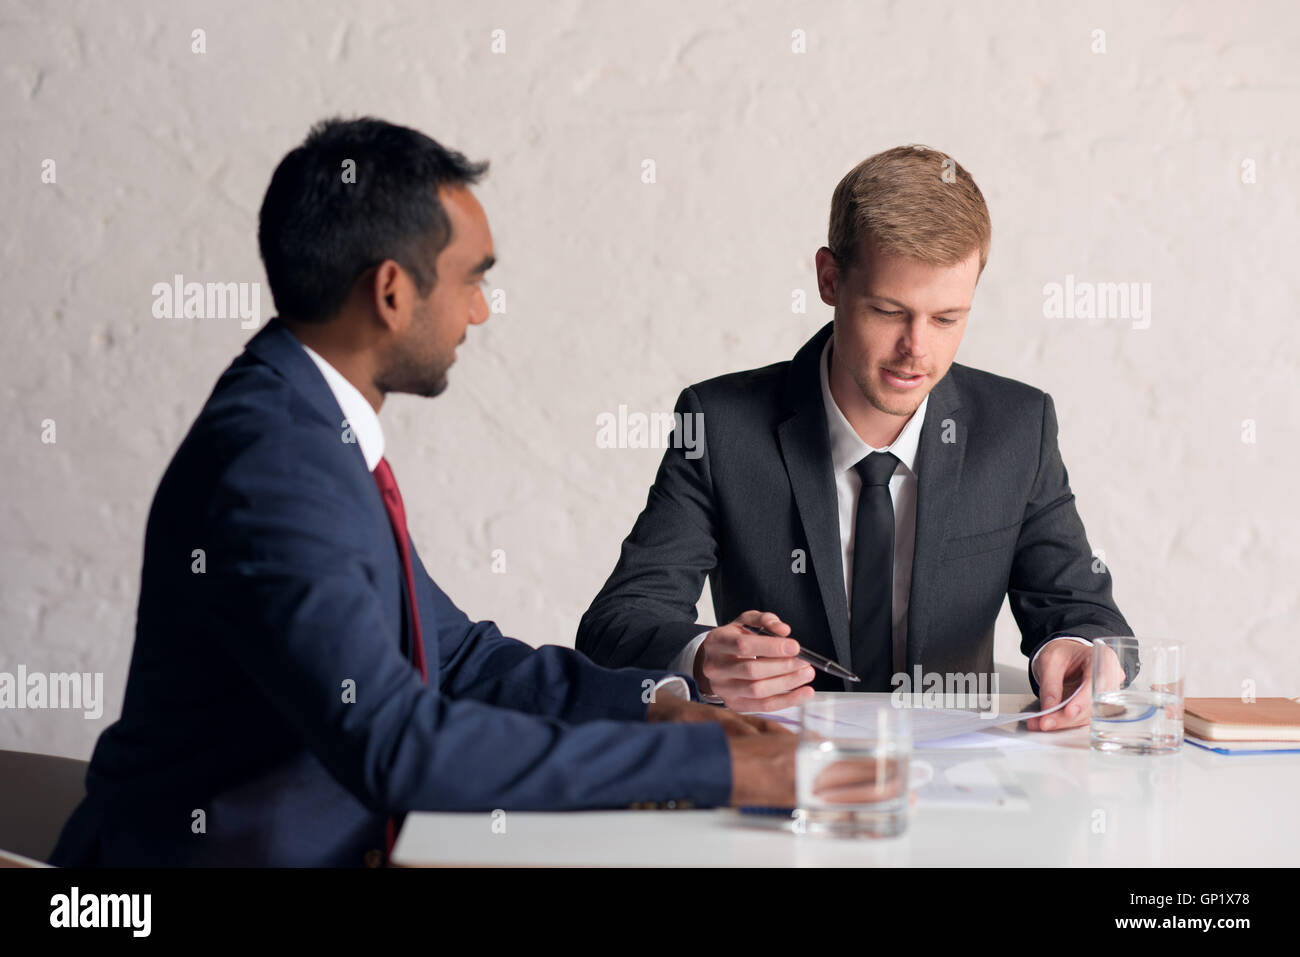 Getting down to business is what they do Stock Photo